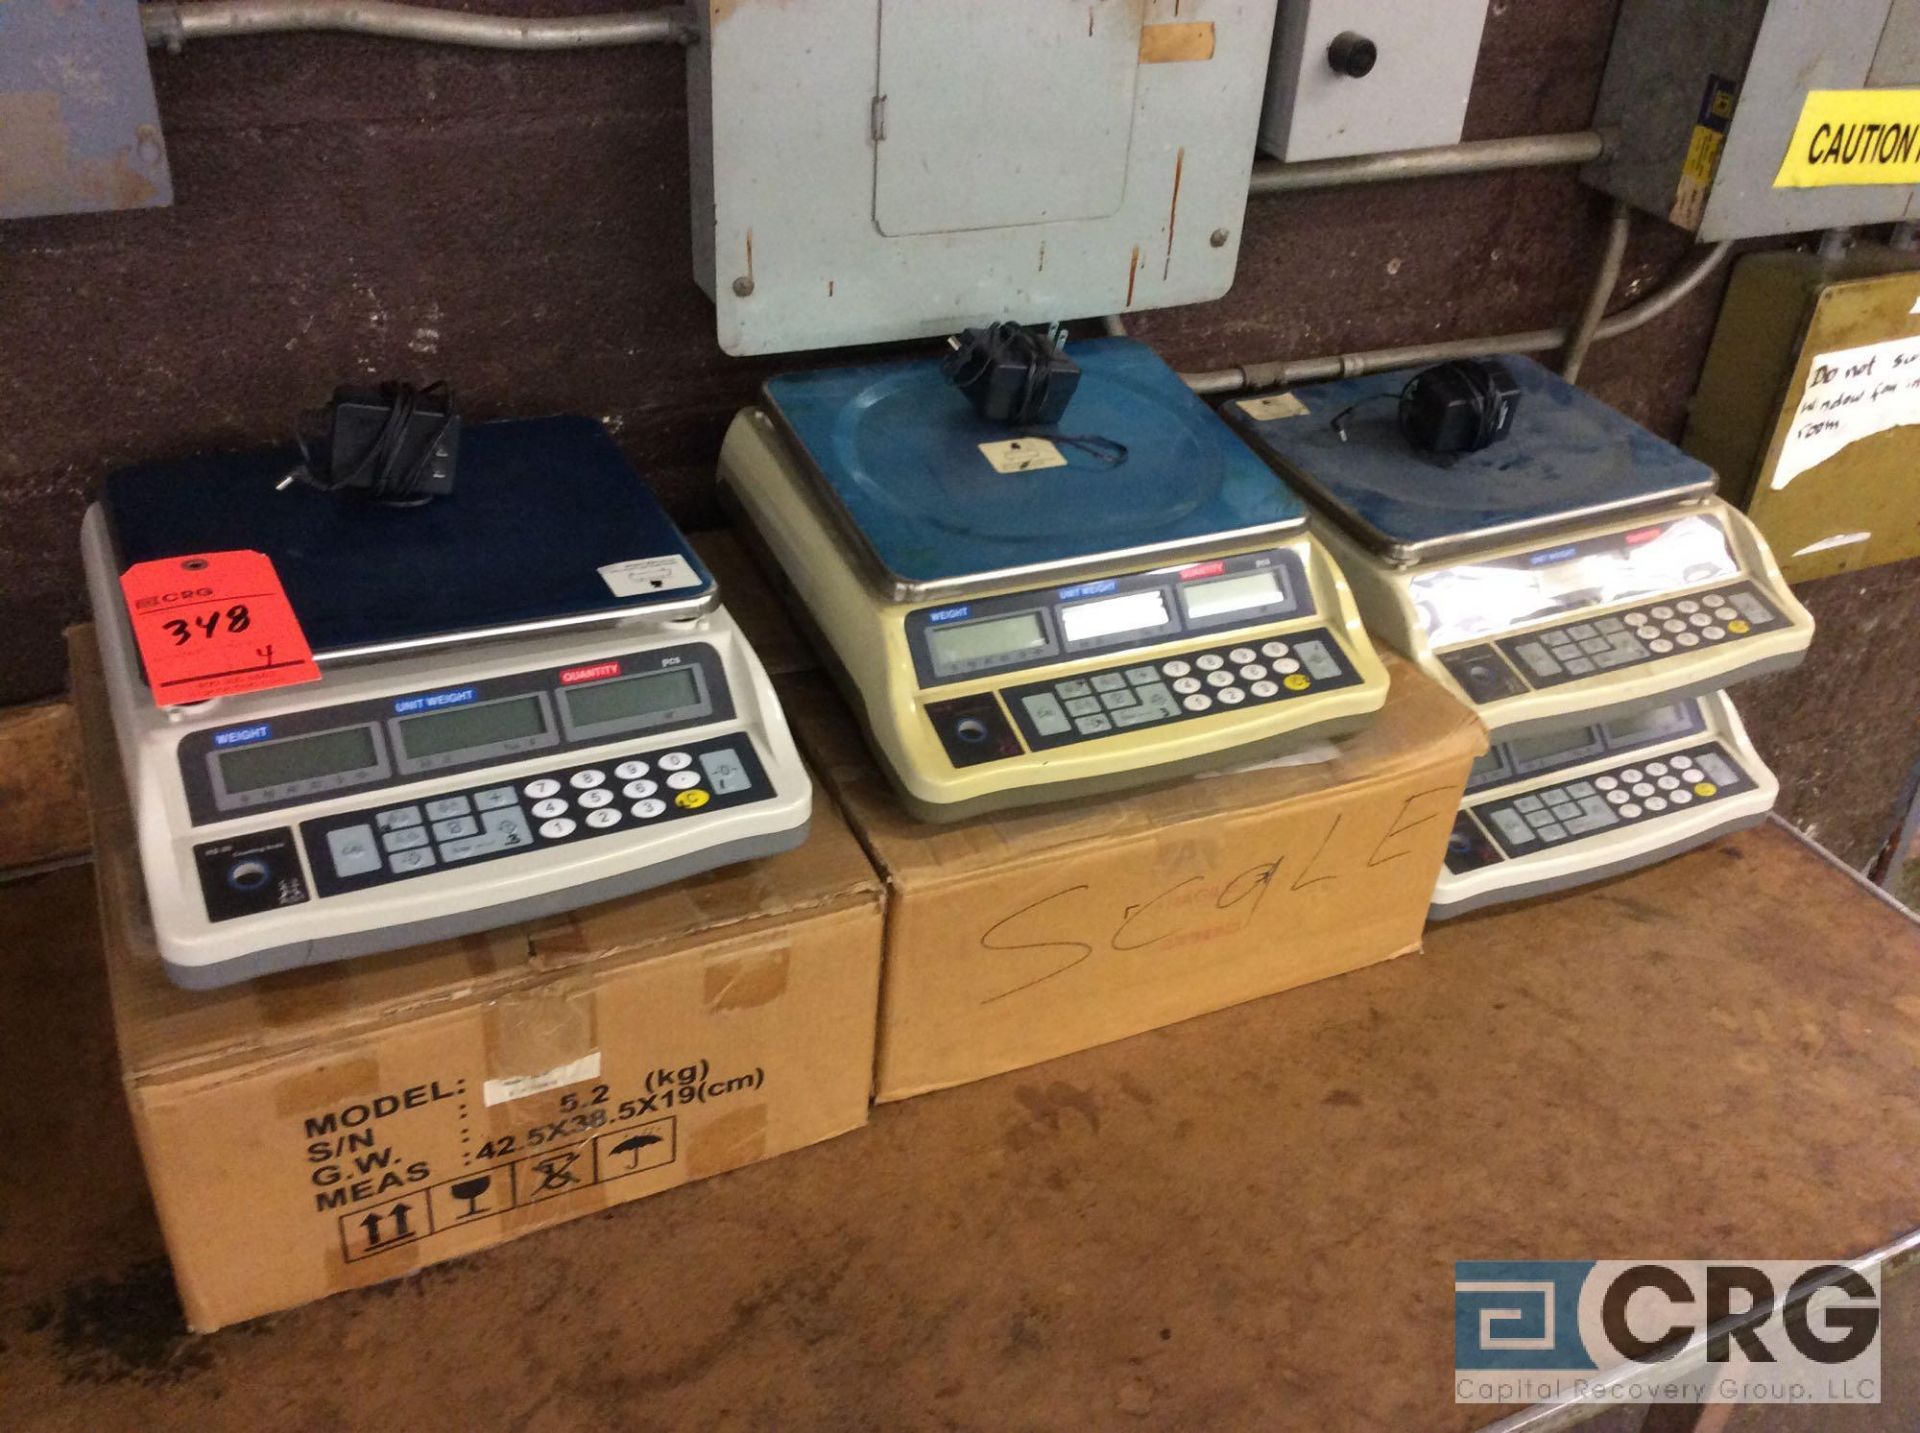 Lot of (4) digital counting scales (LOCATION: 2ND FLOOR)